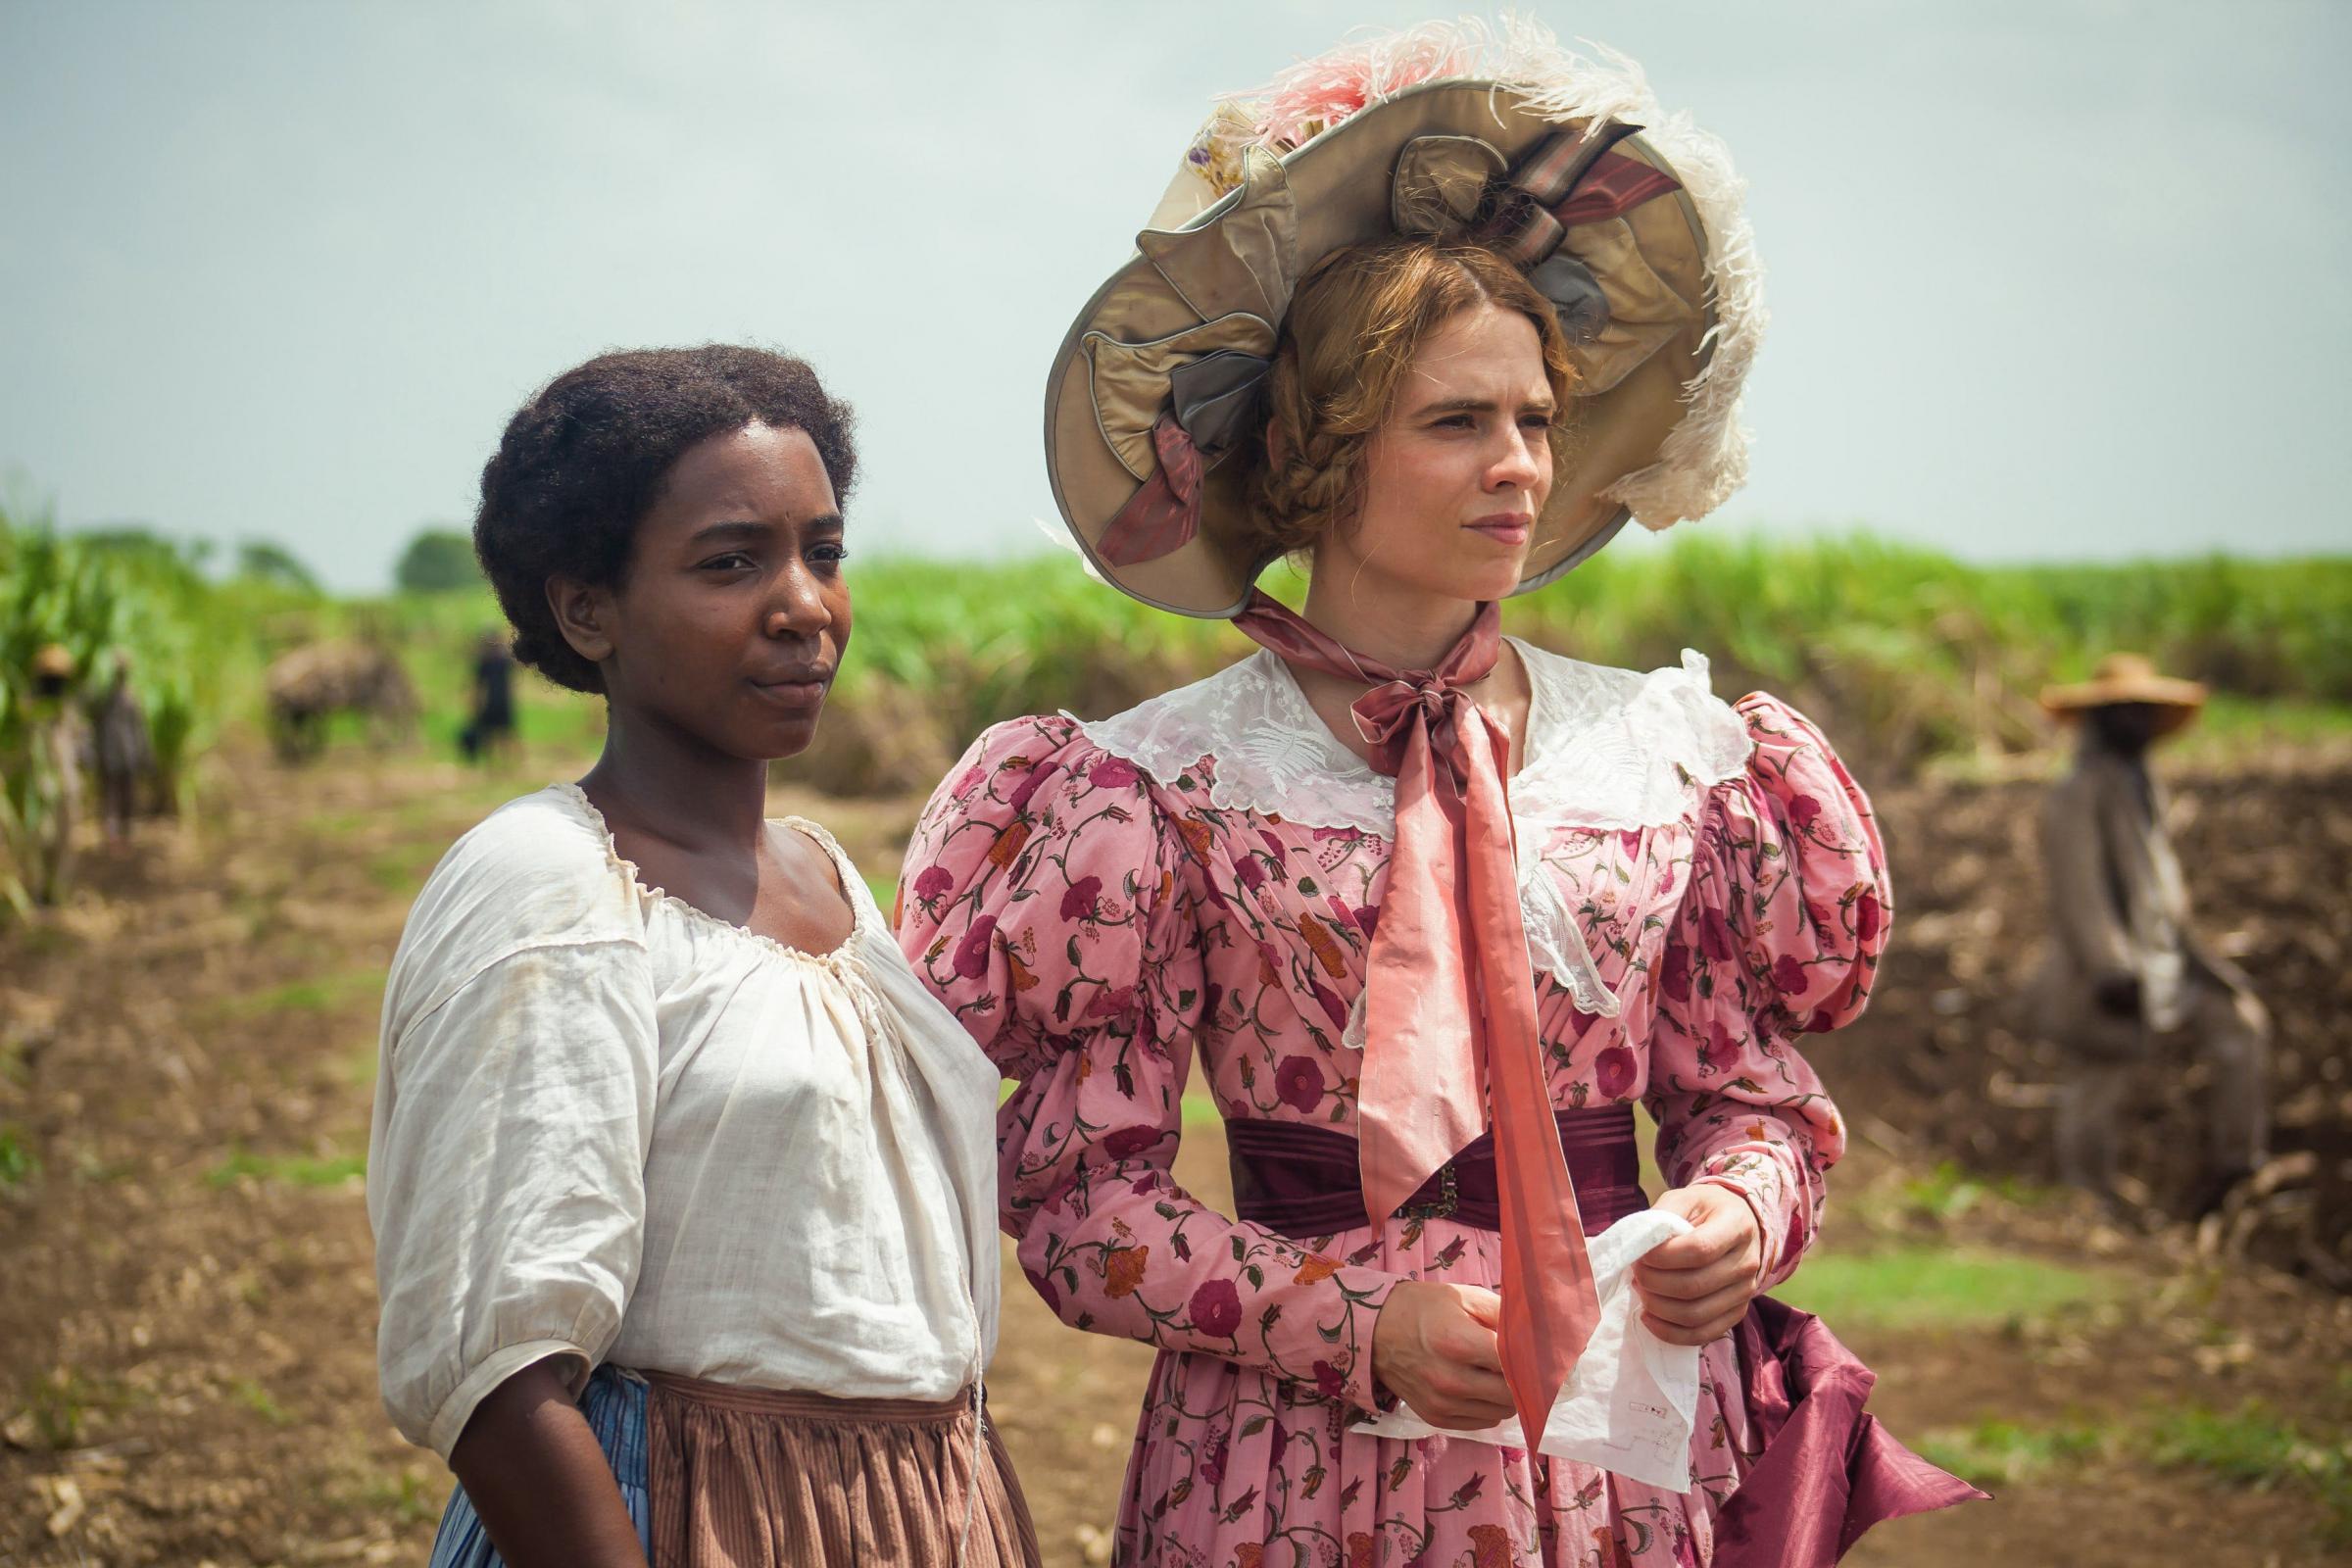 Tamara Lawrance says racism in BBC slave drama echoes stereotypes she suffered